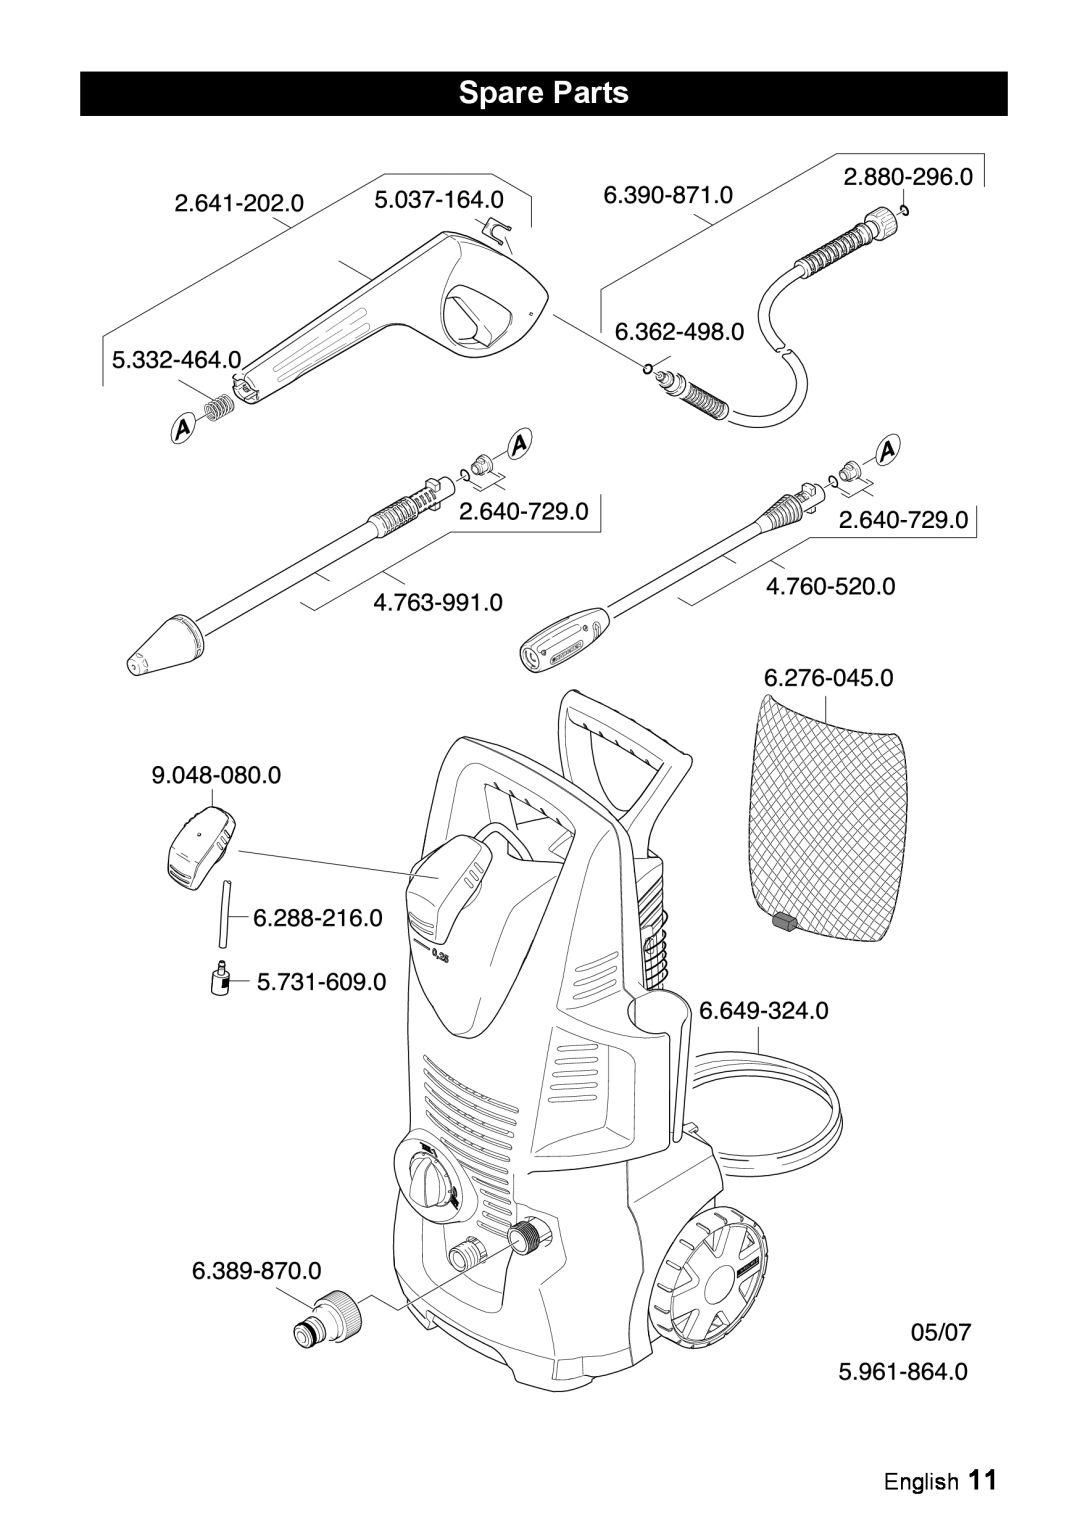 Karcher K 2.91 MD manual Spare Parts, English 